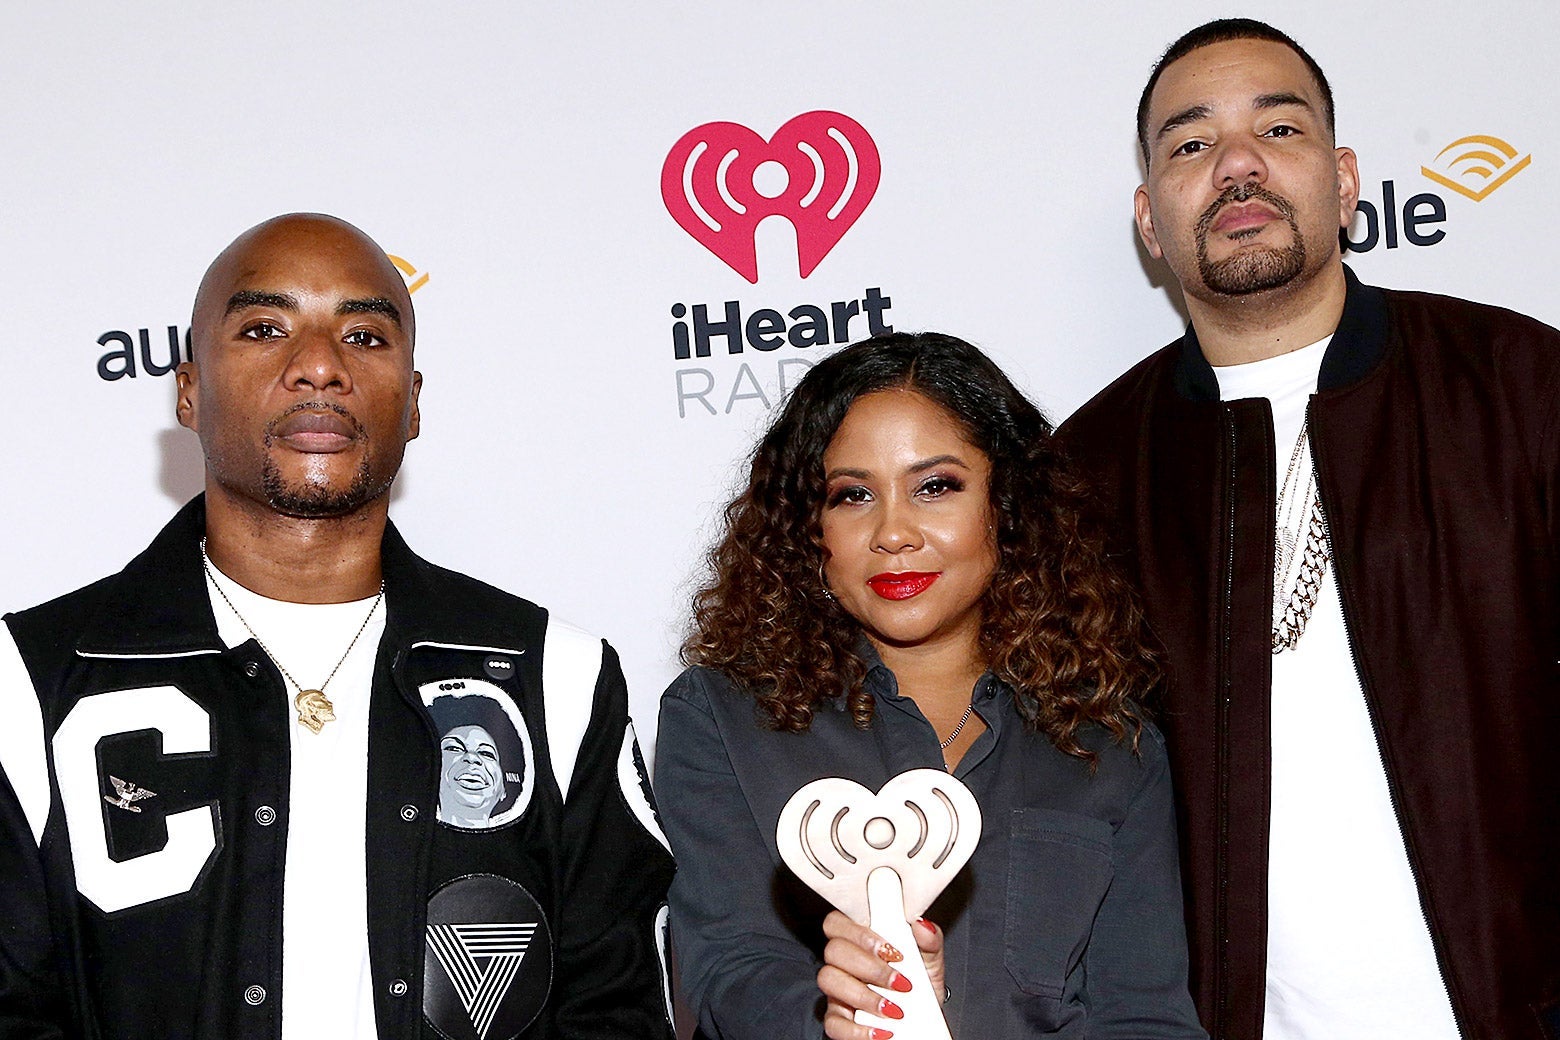 Angela Yee holds up a trophy with Charlamagne and Envy standing on either side of her in front of an Audible iHeartRadio step and repeat